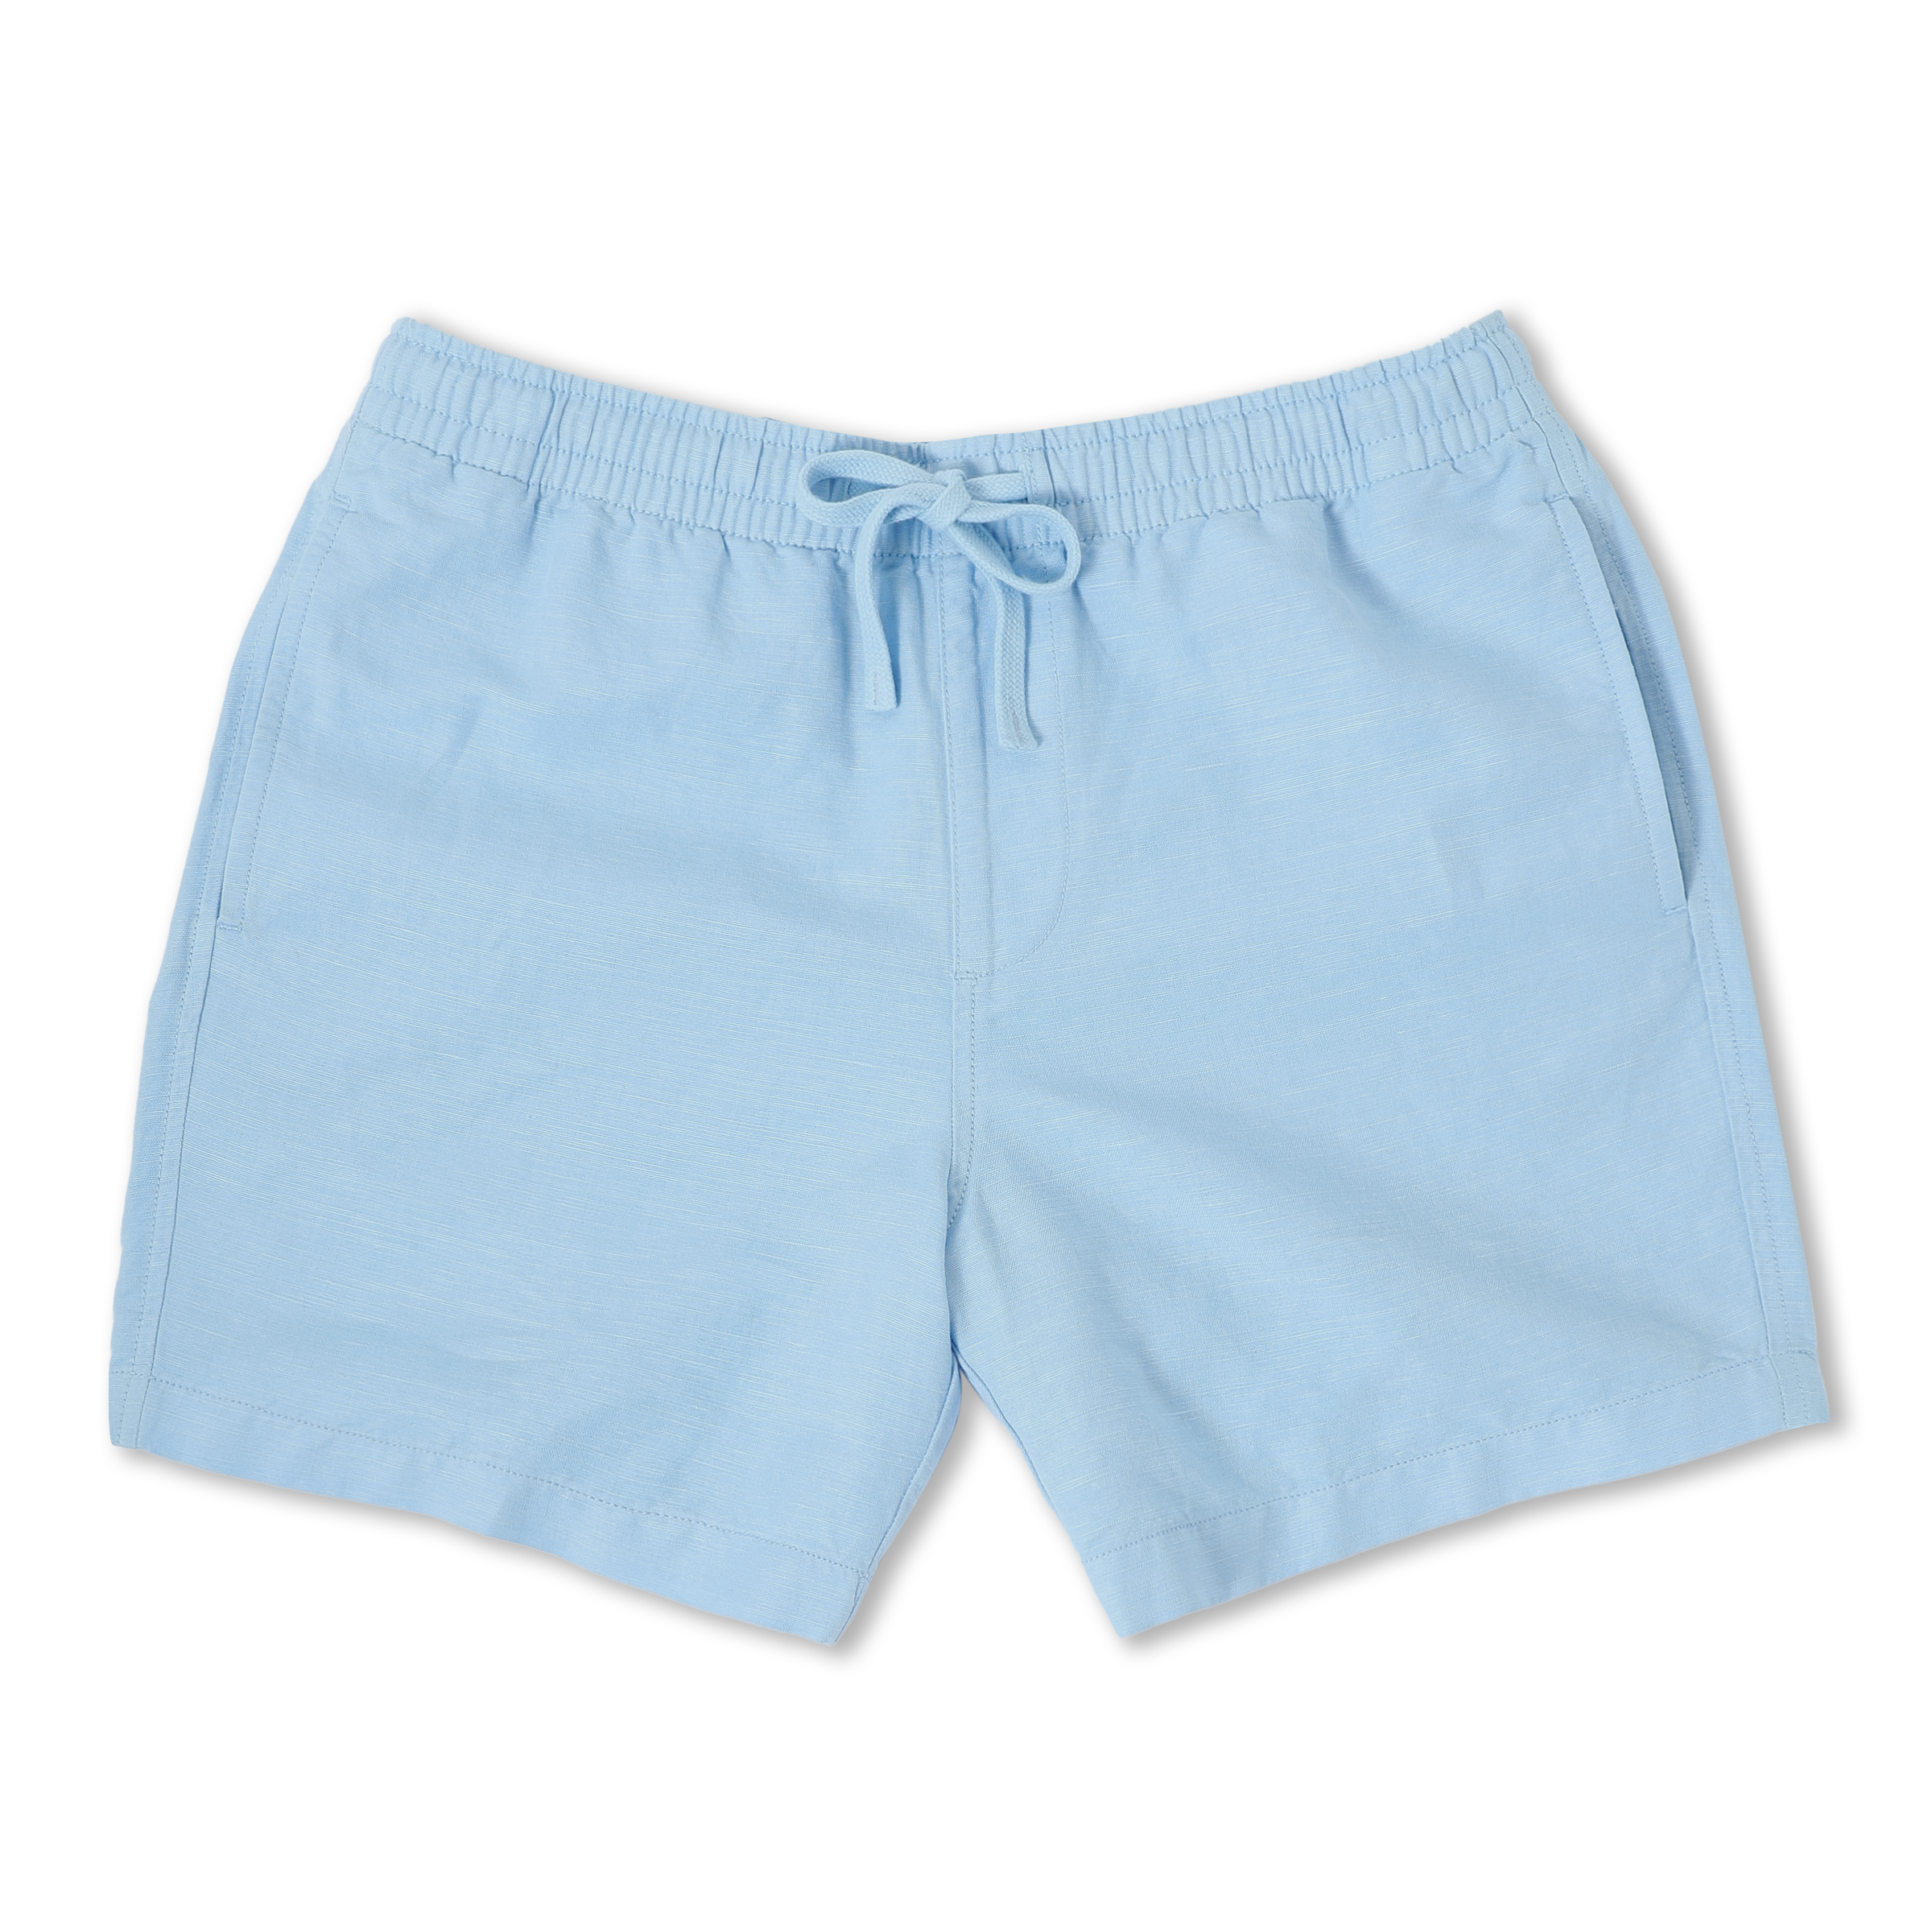 Retreat Linen Short Cool Blue  front with an elastic waistband, two side seam pockets, faux fly, and dyed to match drawstring